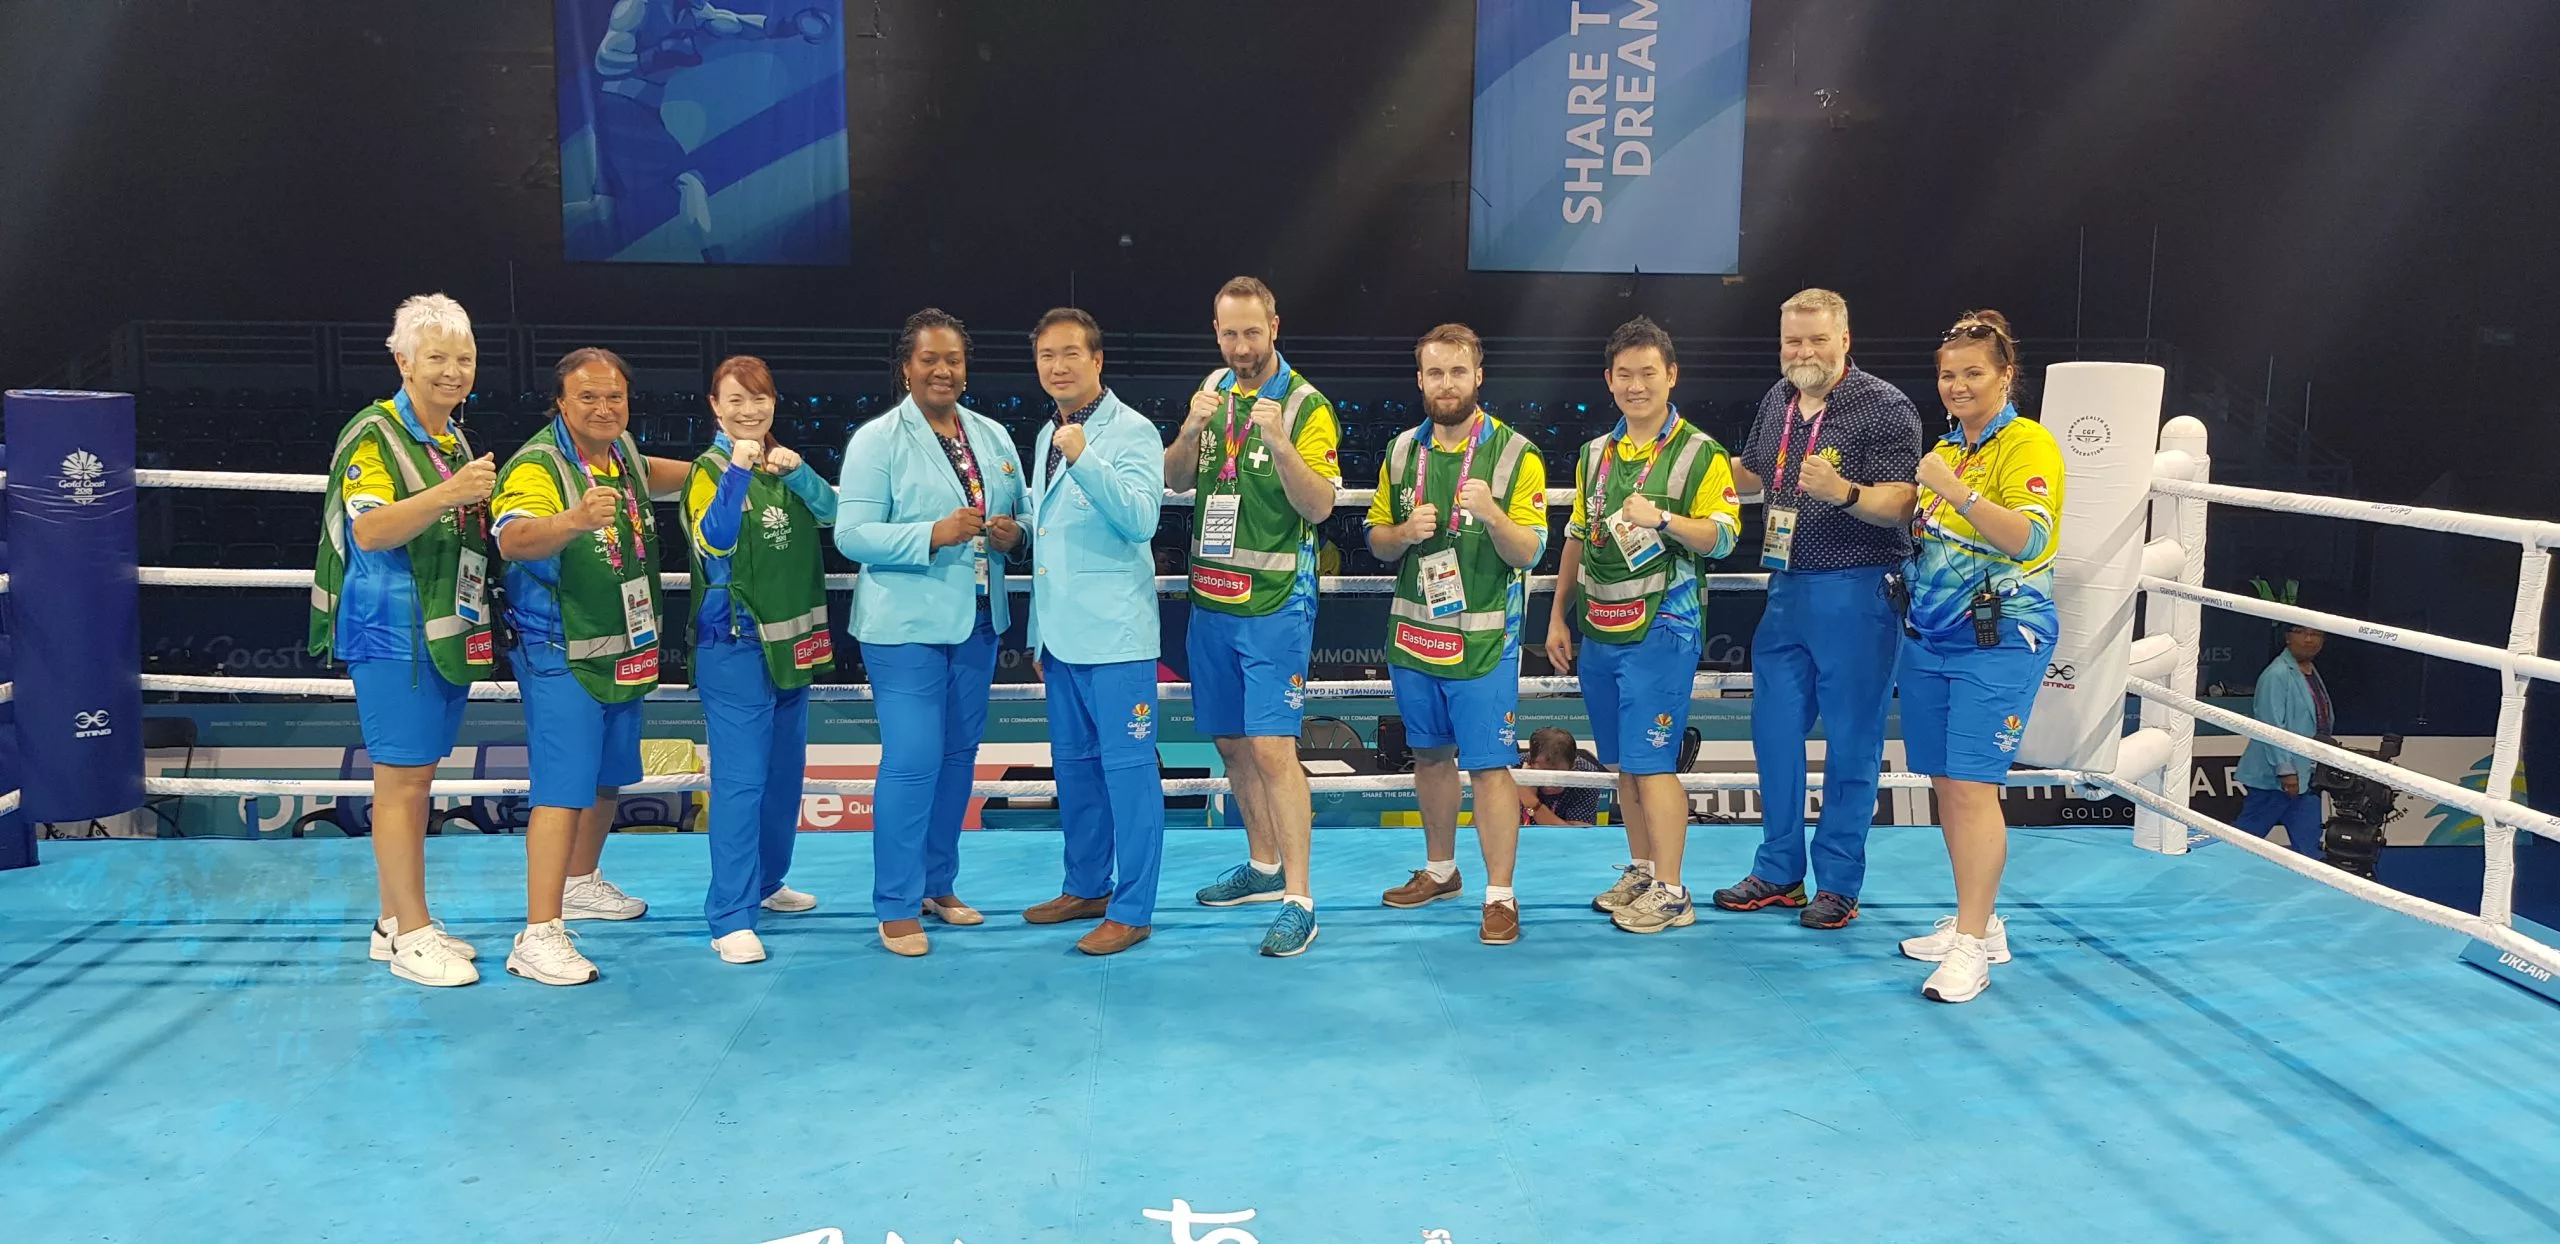 Dr Jason Lam at the 2018 Commonwealth Games Boxing